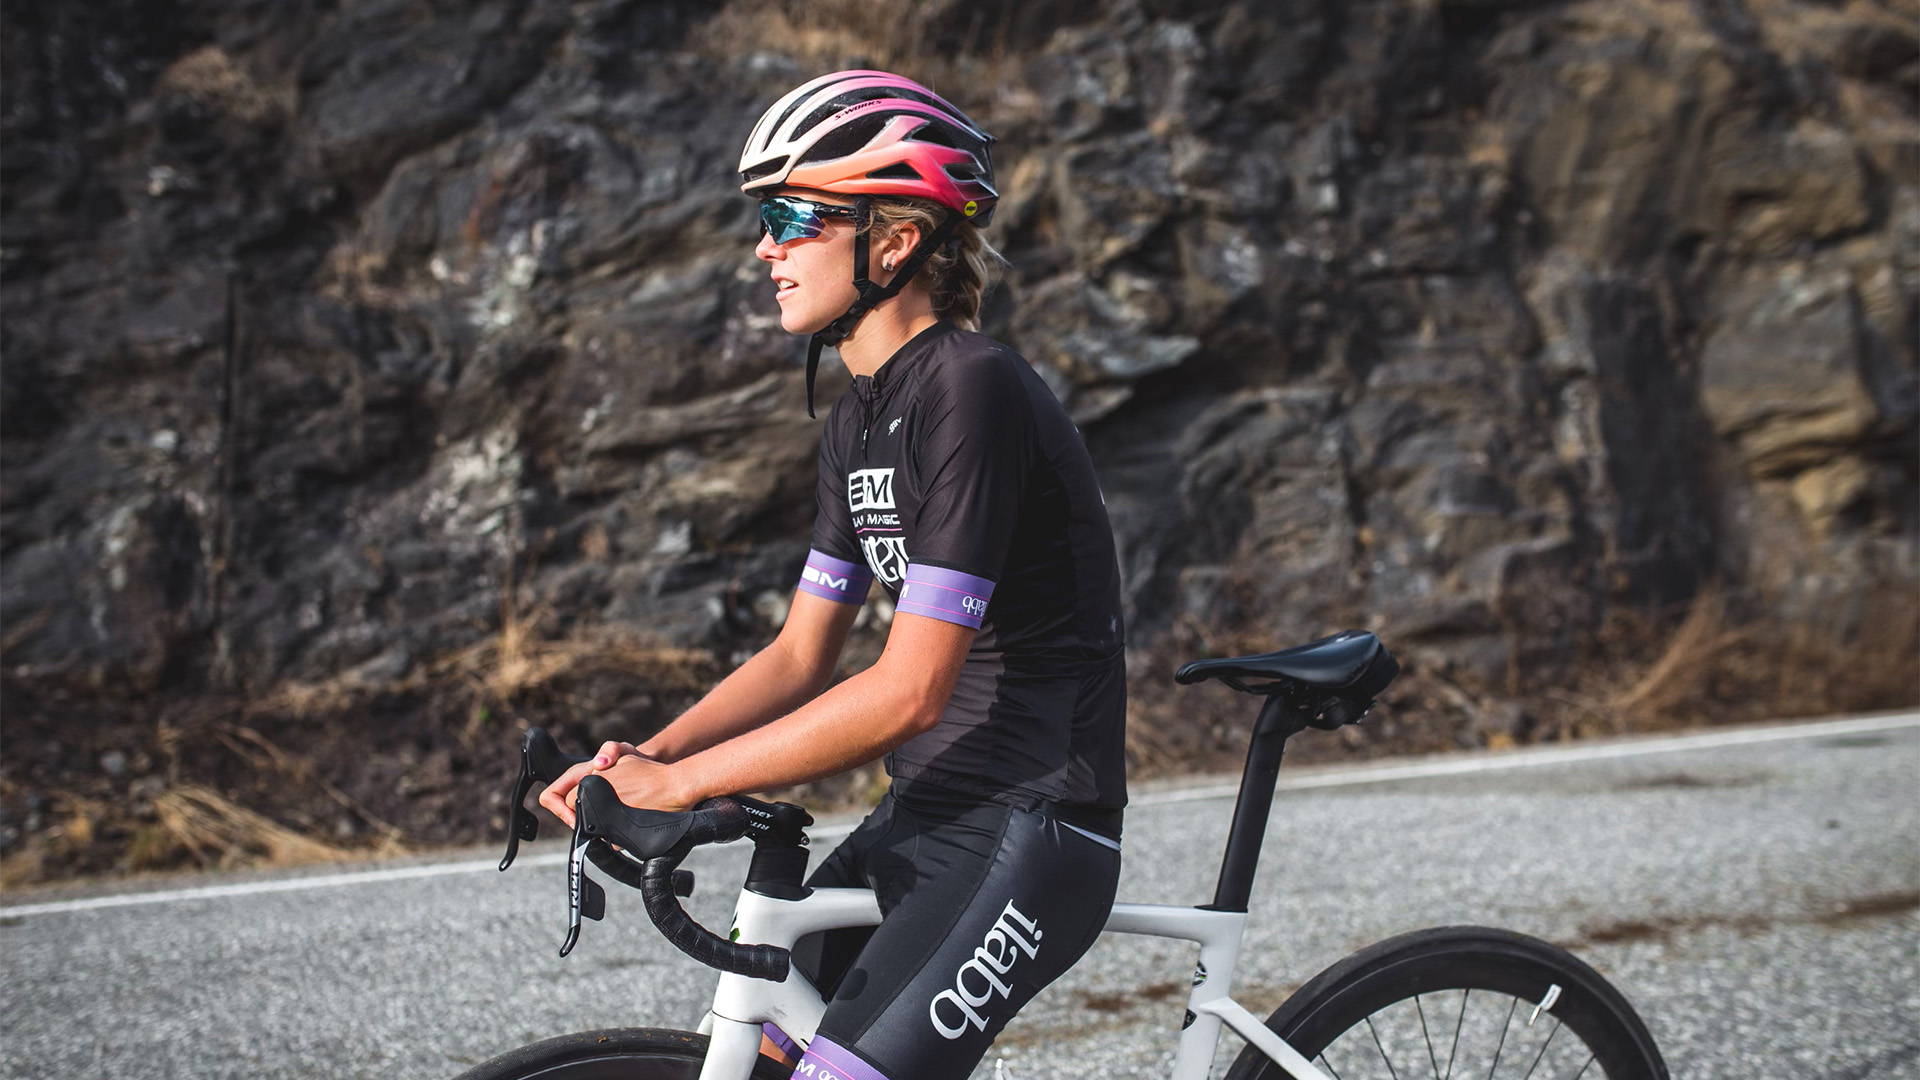 Kimberly Cadzow pro road cyclist uses Myovolt wearable vibration therapy for leg muscle recovery and prehab.